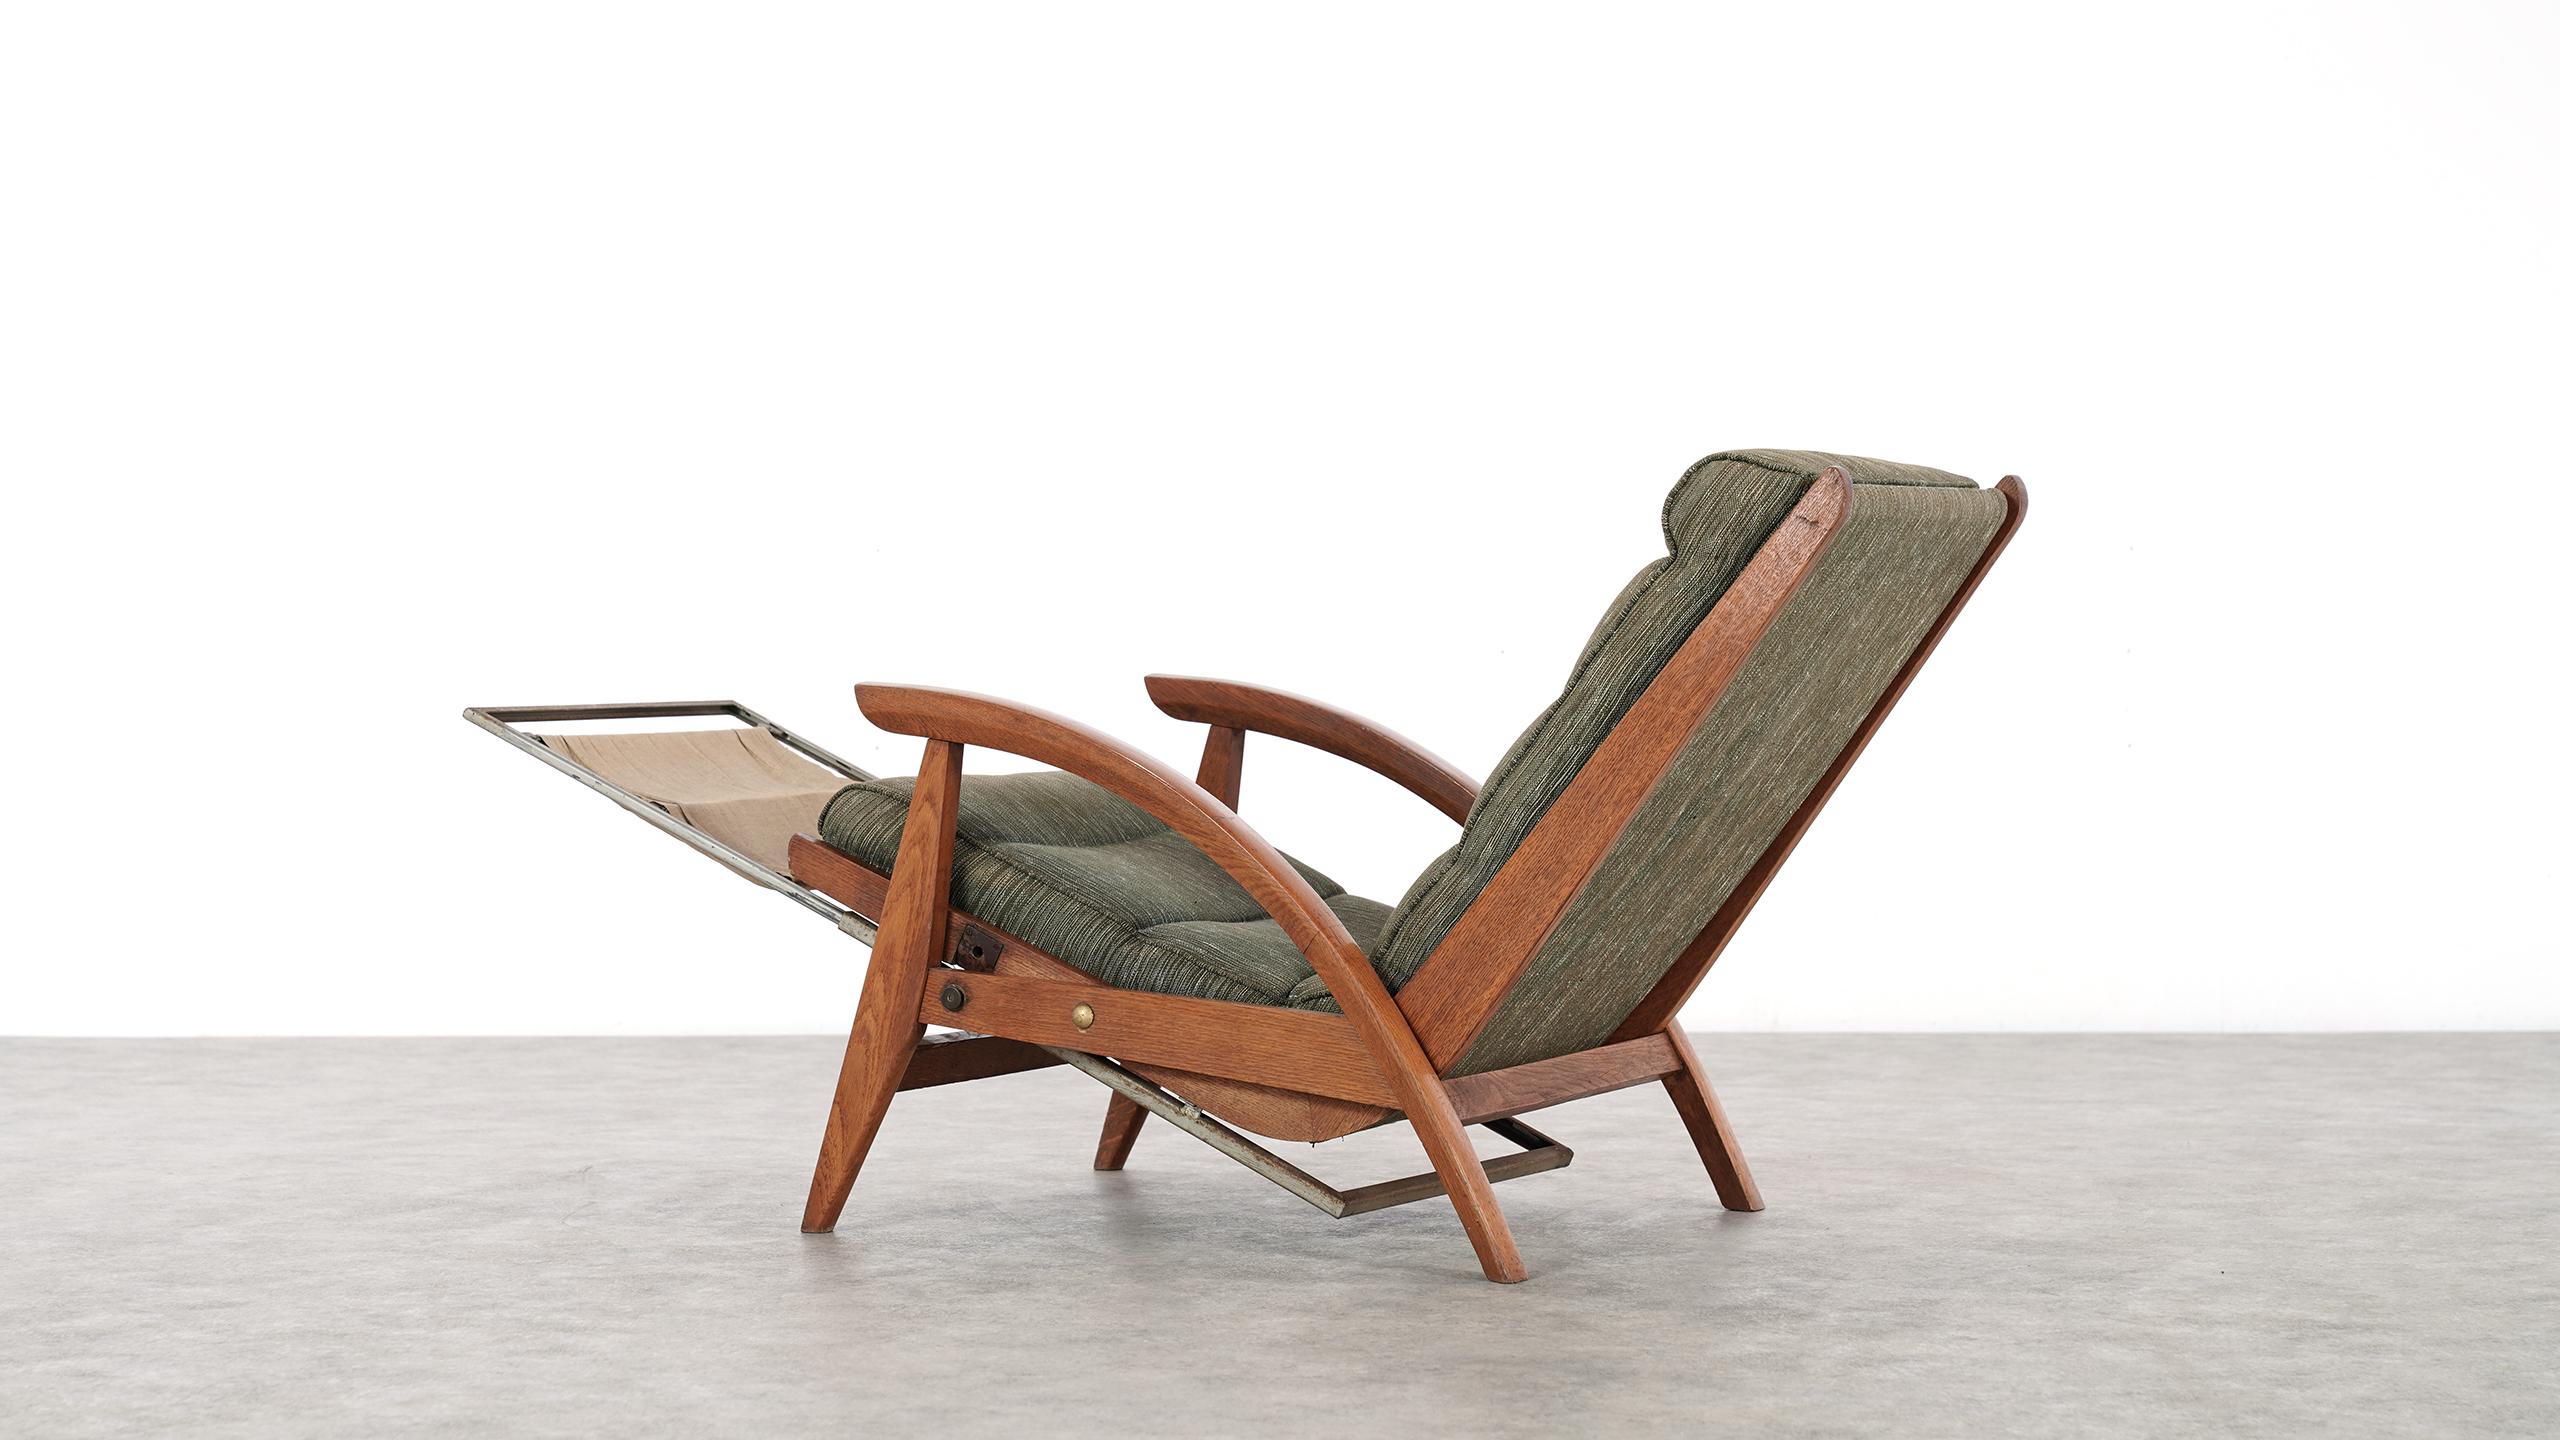 Guy Besnard FS 134 Reclining Lounge Chair, 1954 for Free Span, France Prouvé 10